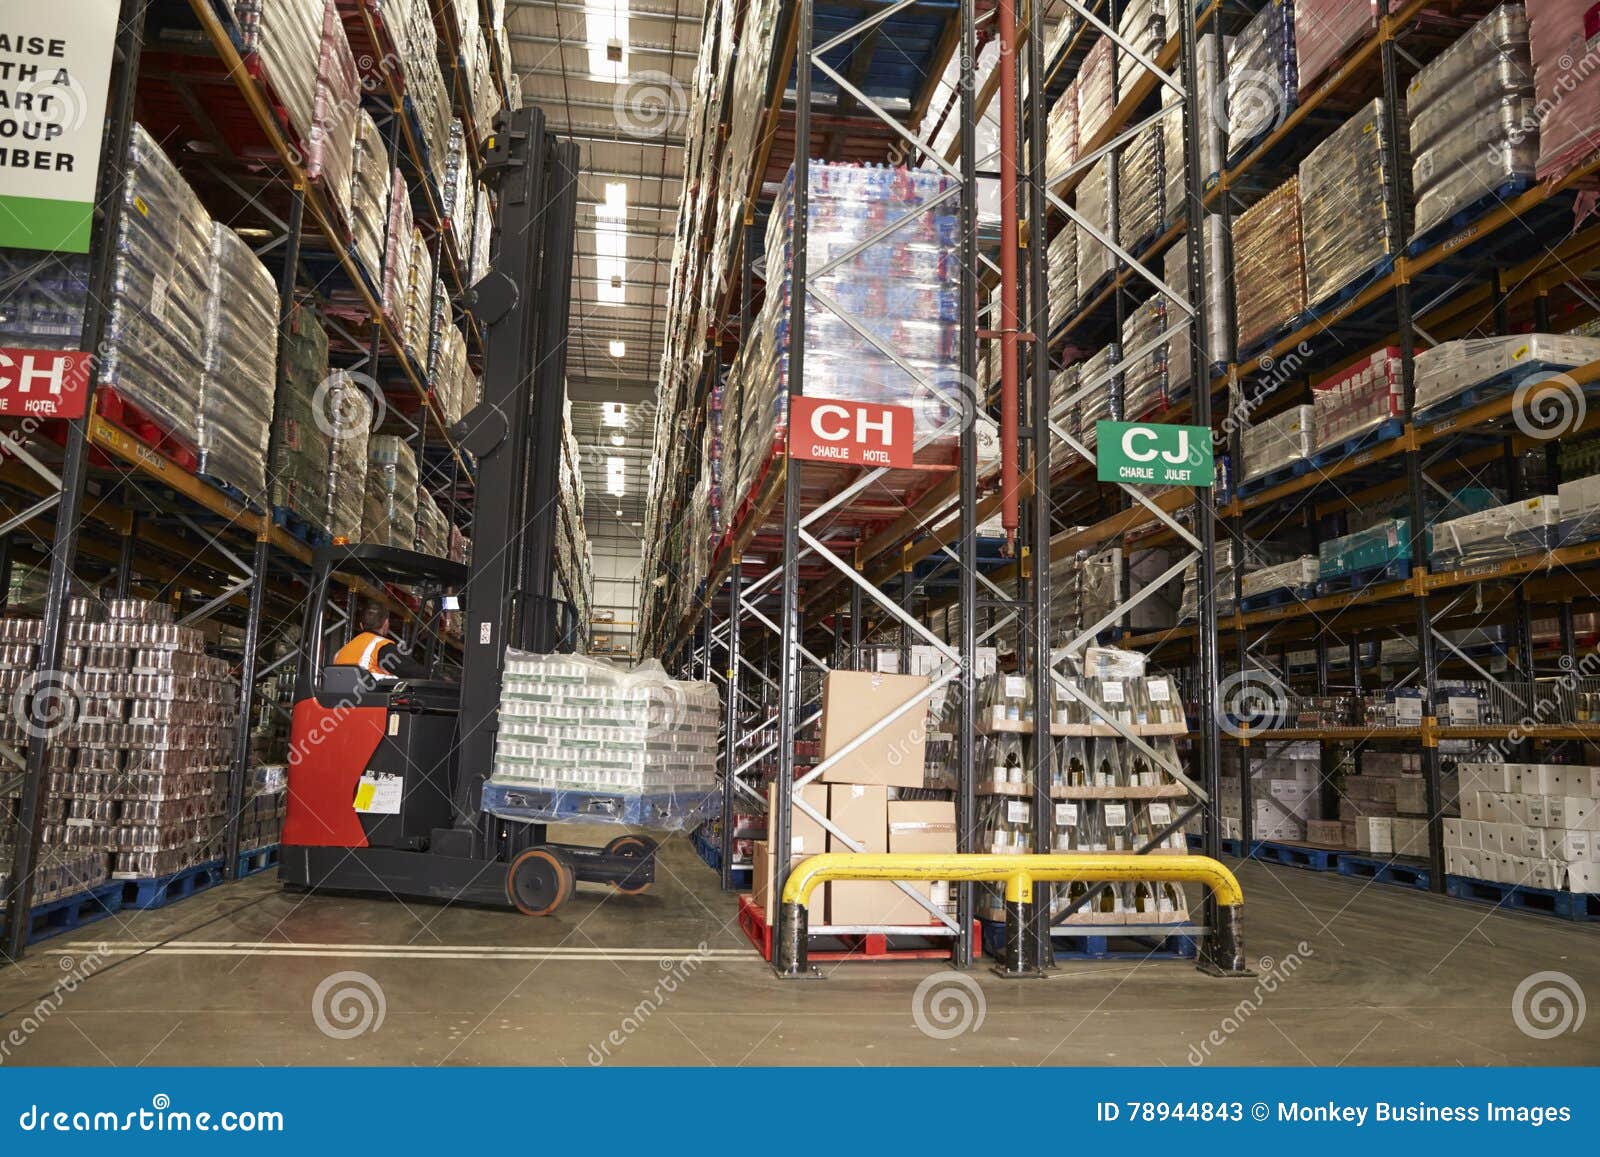 lowering stock in a distribution warehouse using aisle truck